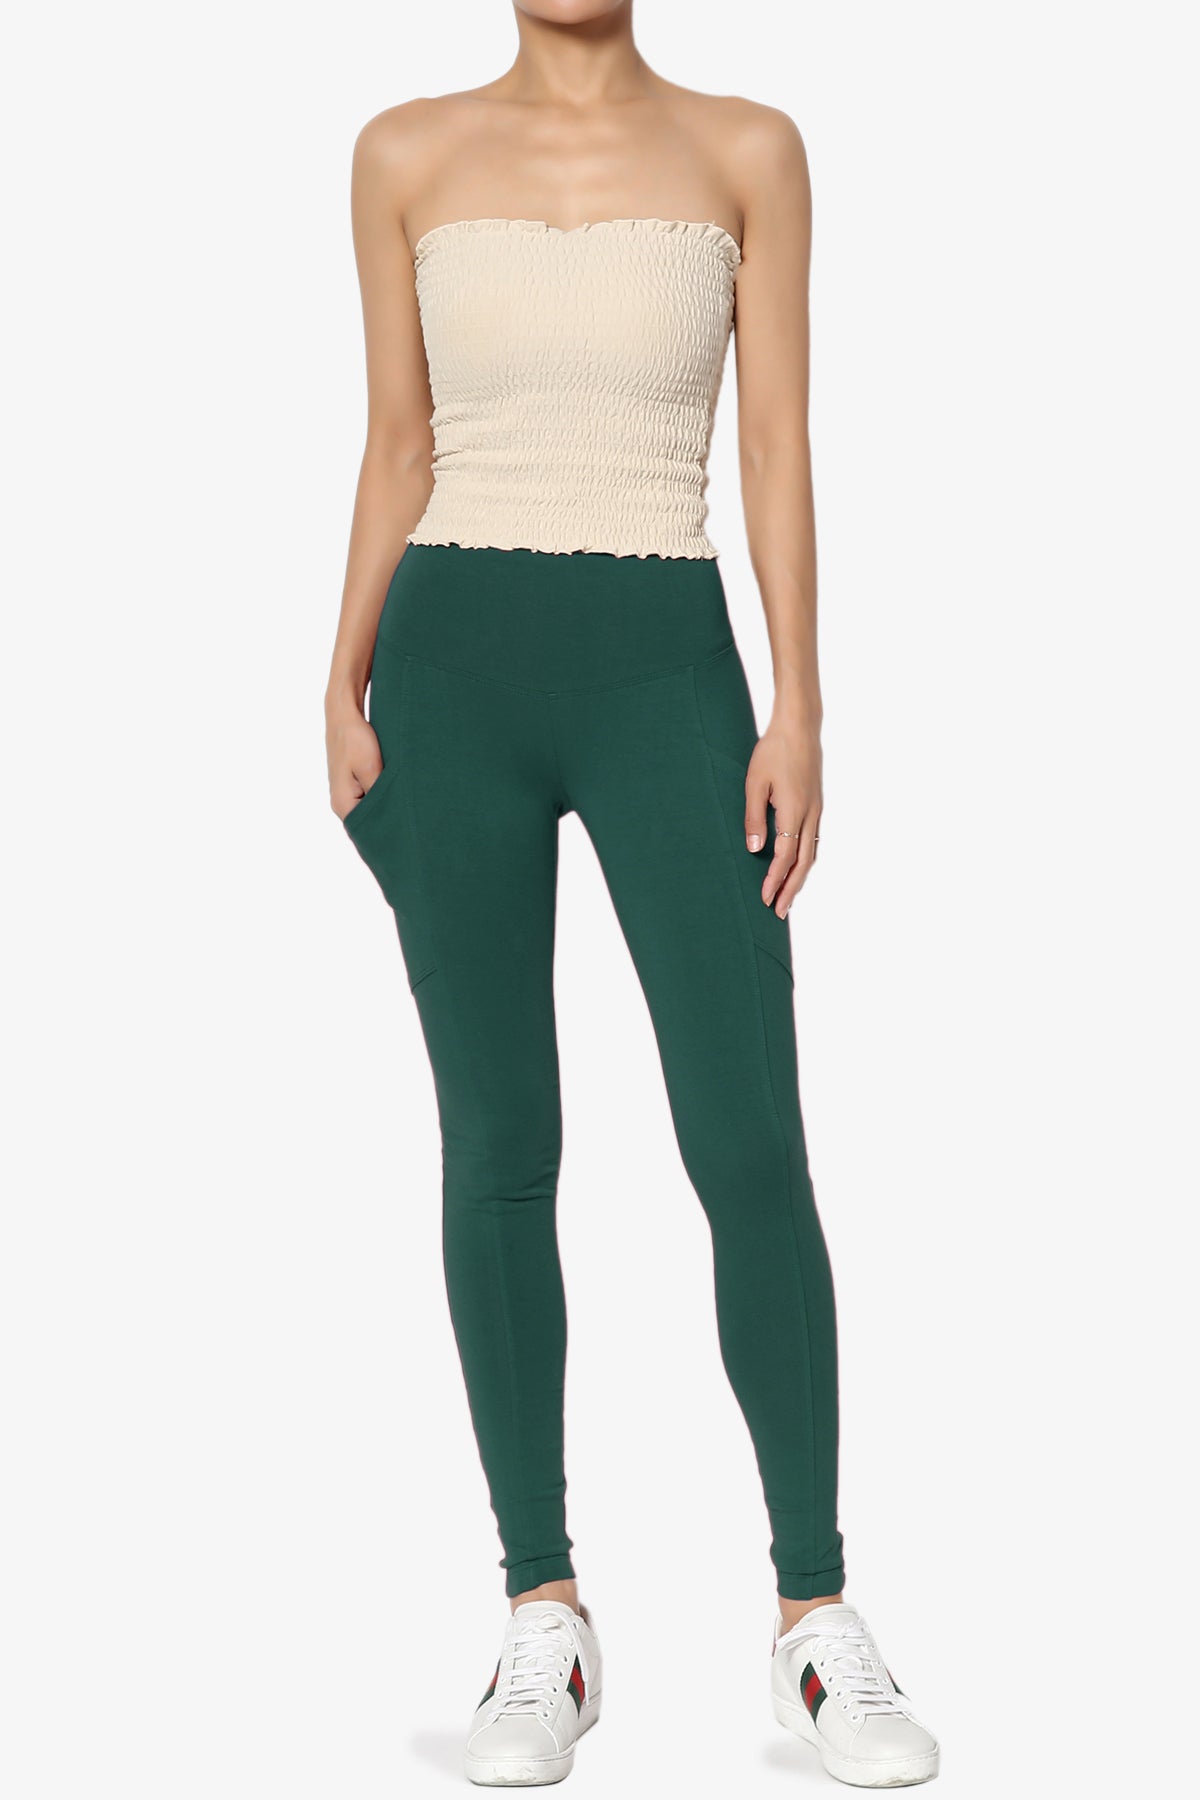 Ansley Luxe Cotton Leggings with Pockets HUNTER GREEN_6